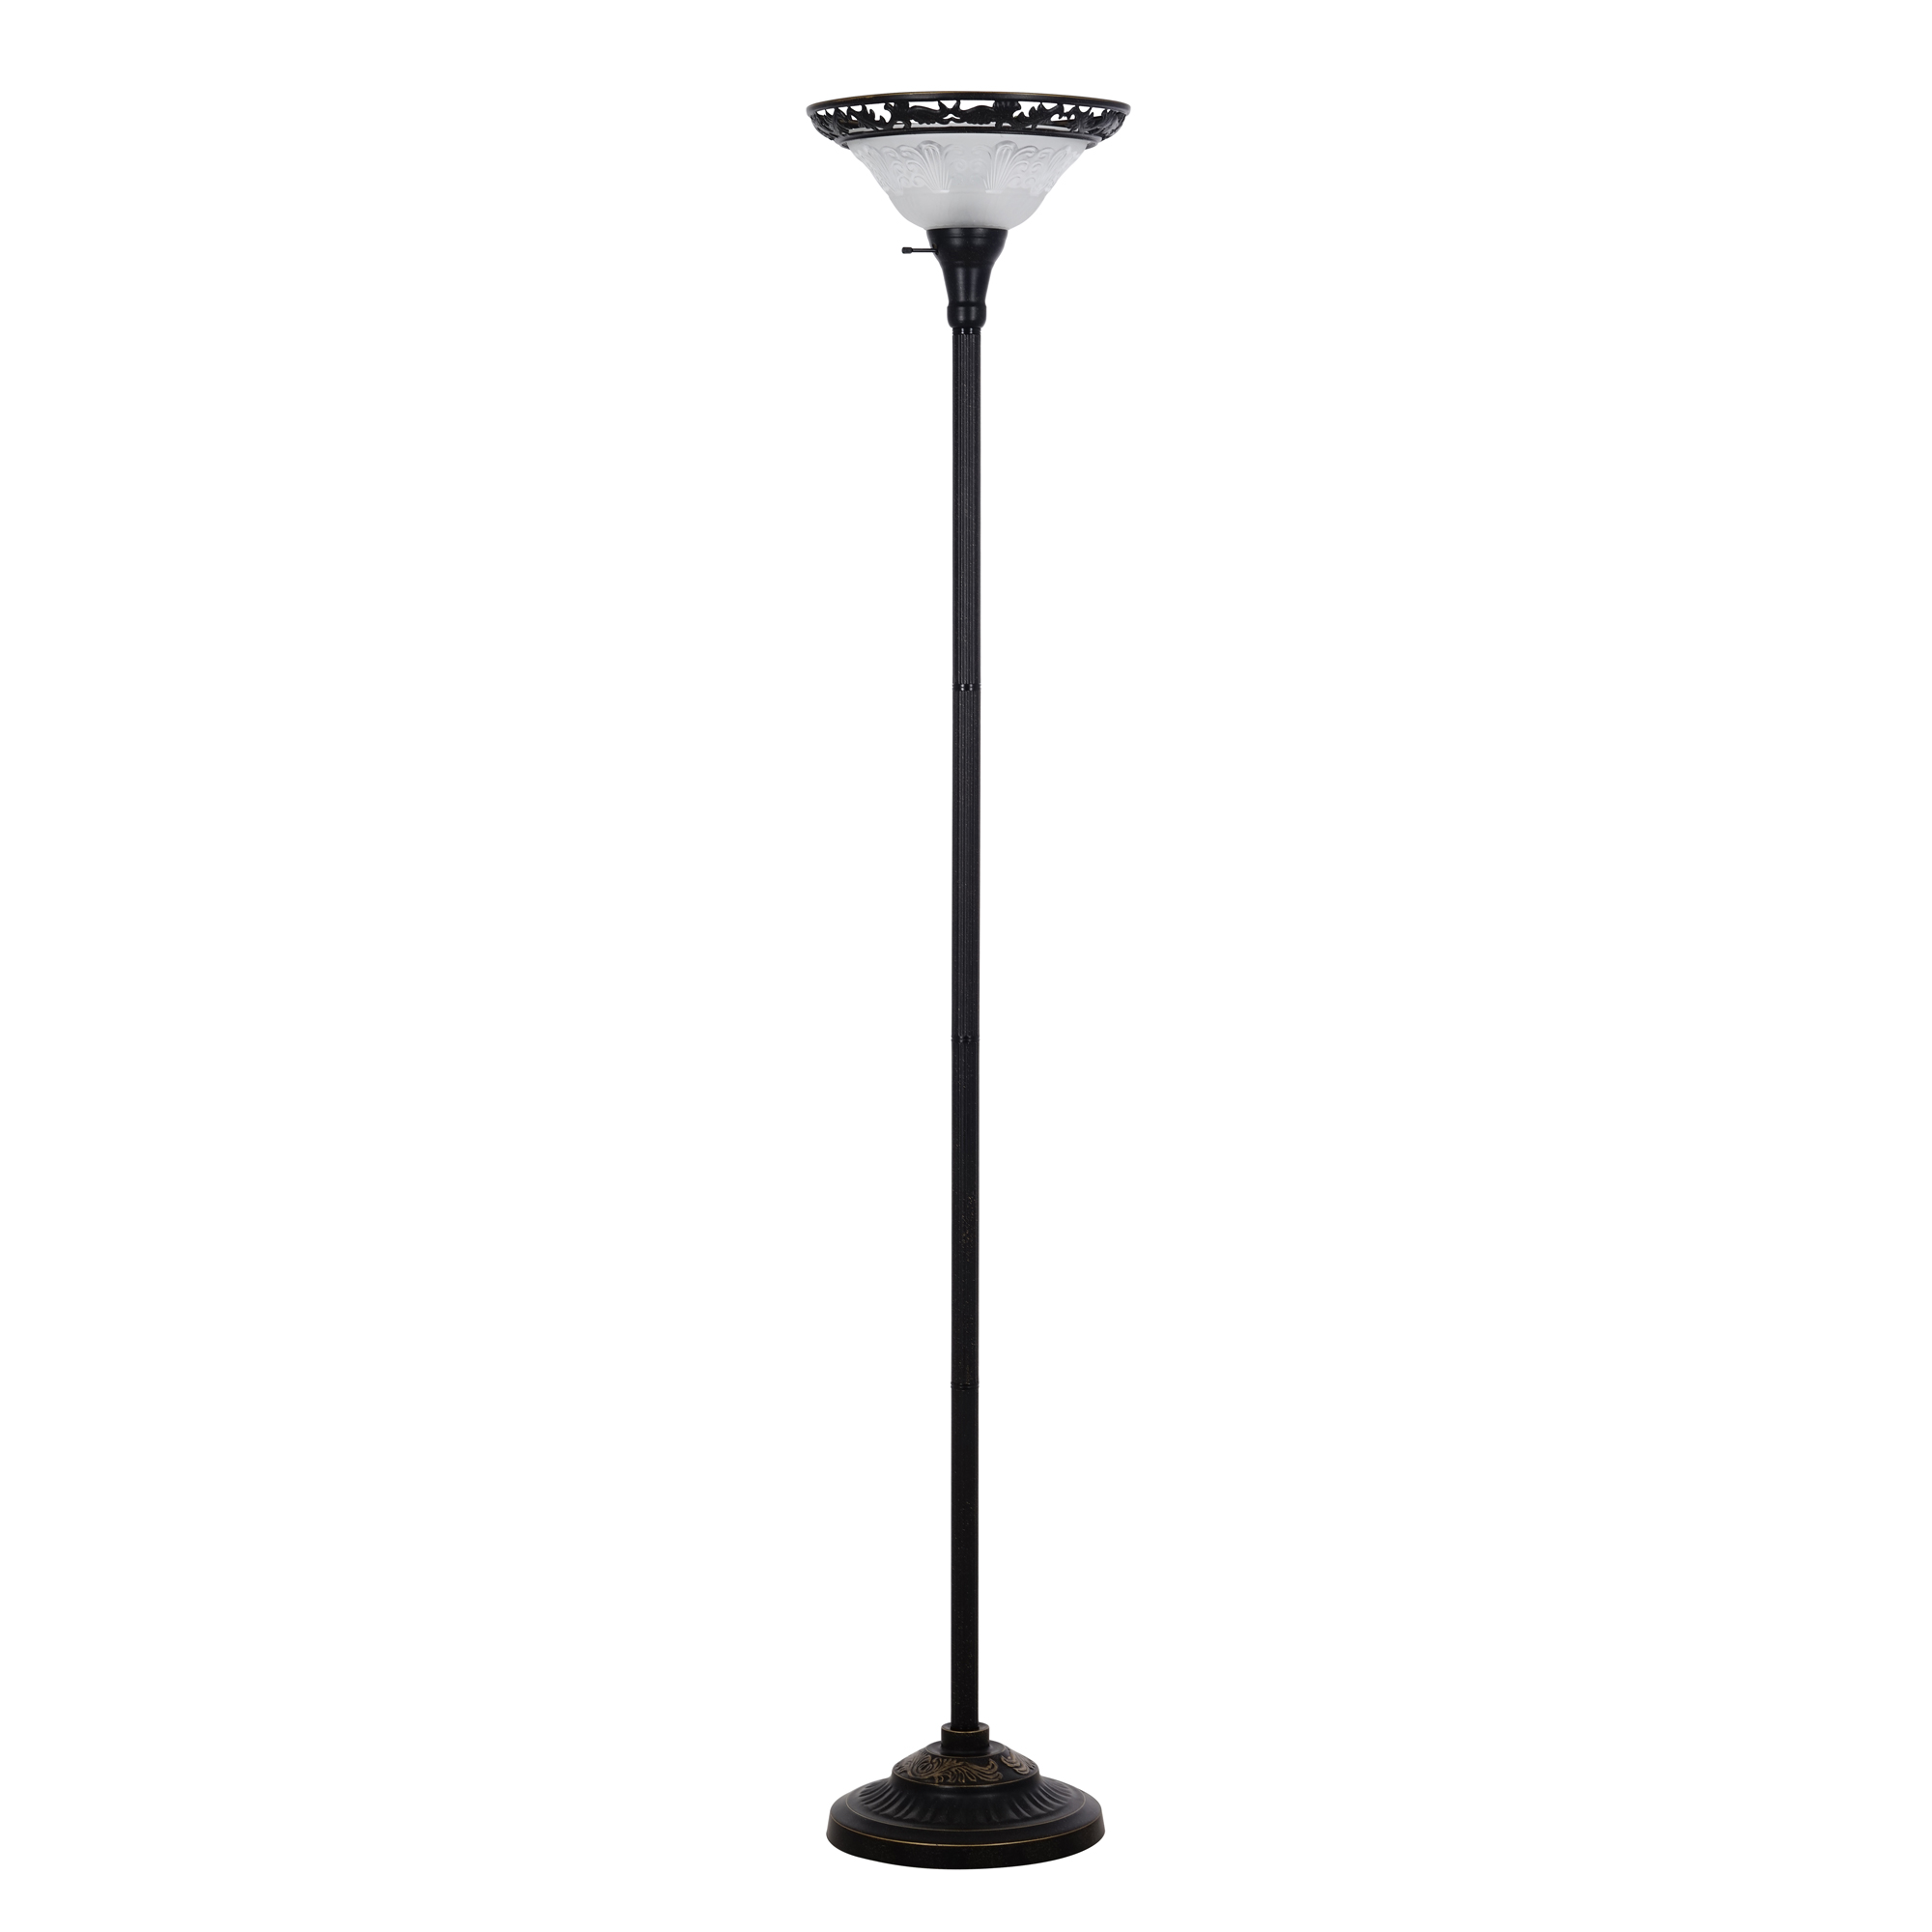 Better Homes & Gardnes Victorian Floor Lamp in Bronze Color 70"H, Metal Material with LED Bulb Included - image 1 of 7